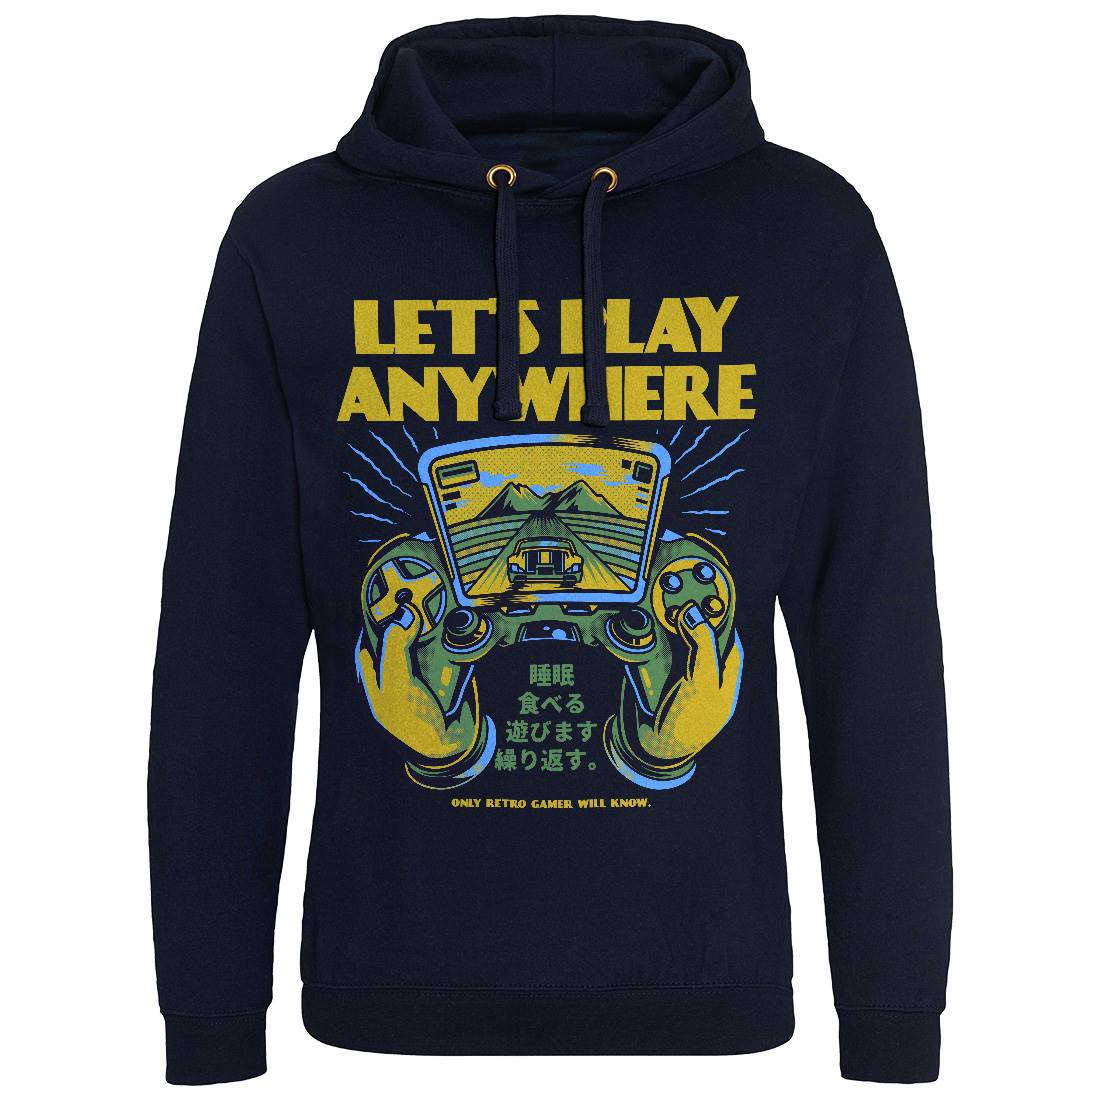 Lets Play Anywhere Mens Hoodie Without Pocket Geek D634